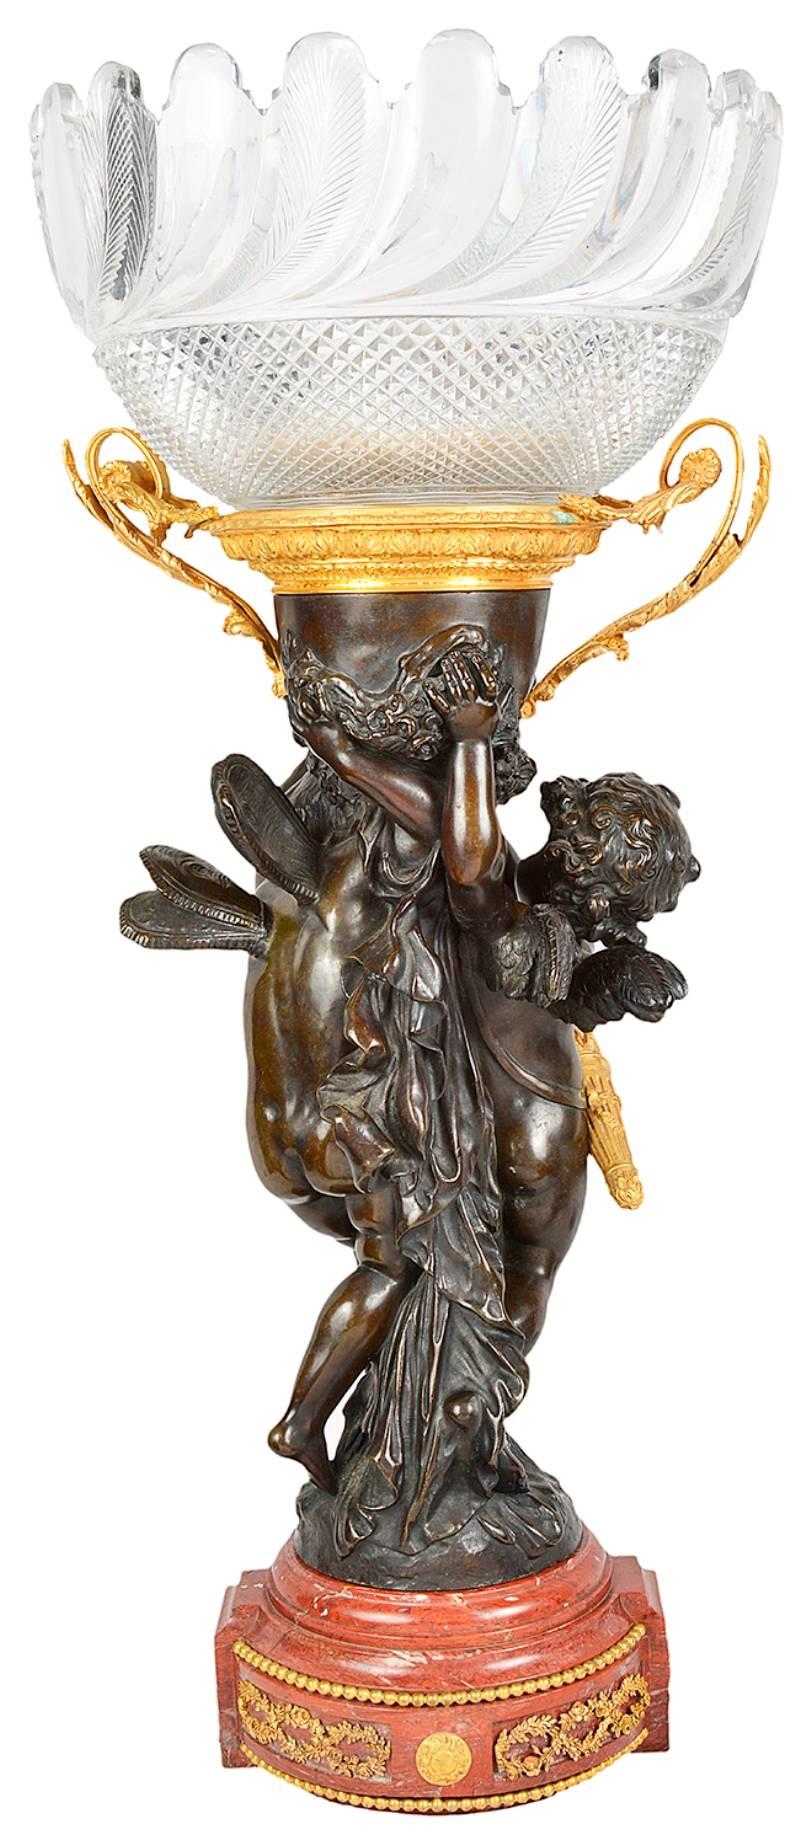 A wonderfully impressive 19th century bronze, gilded ormolu and cut glass centrepiece. Have a cut glass bowl with gilded ormolu handles, supported by a pair of winged cherubs and raised on a rouge marble base with ormolu mounts.
Signed; A. Moreau.